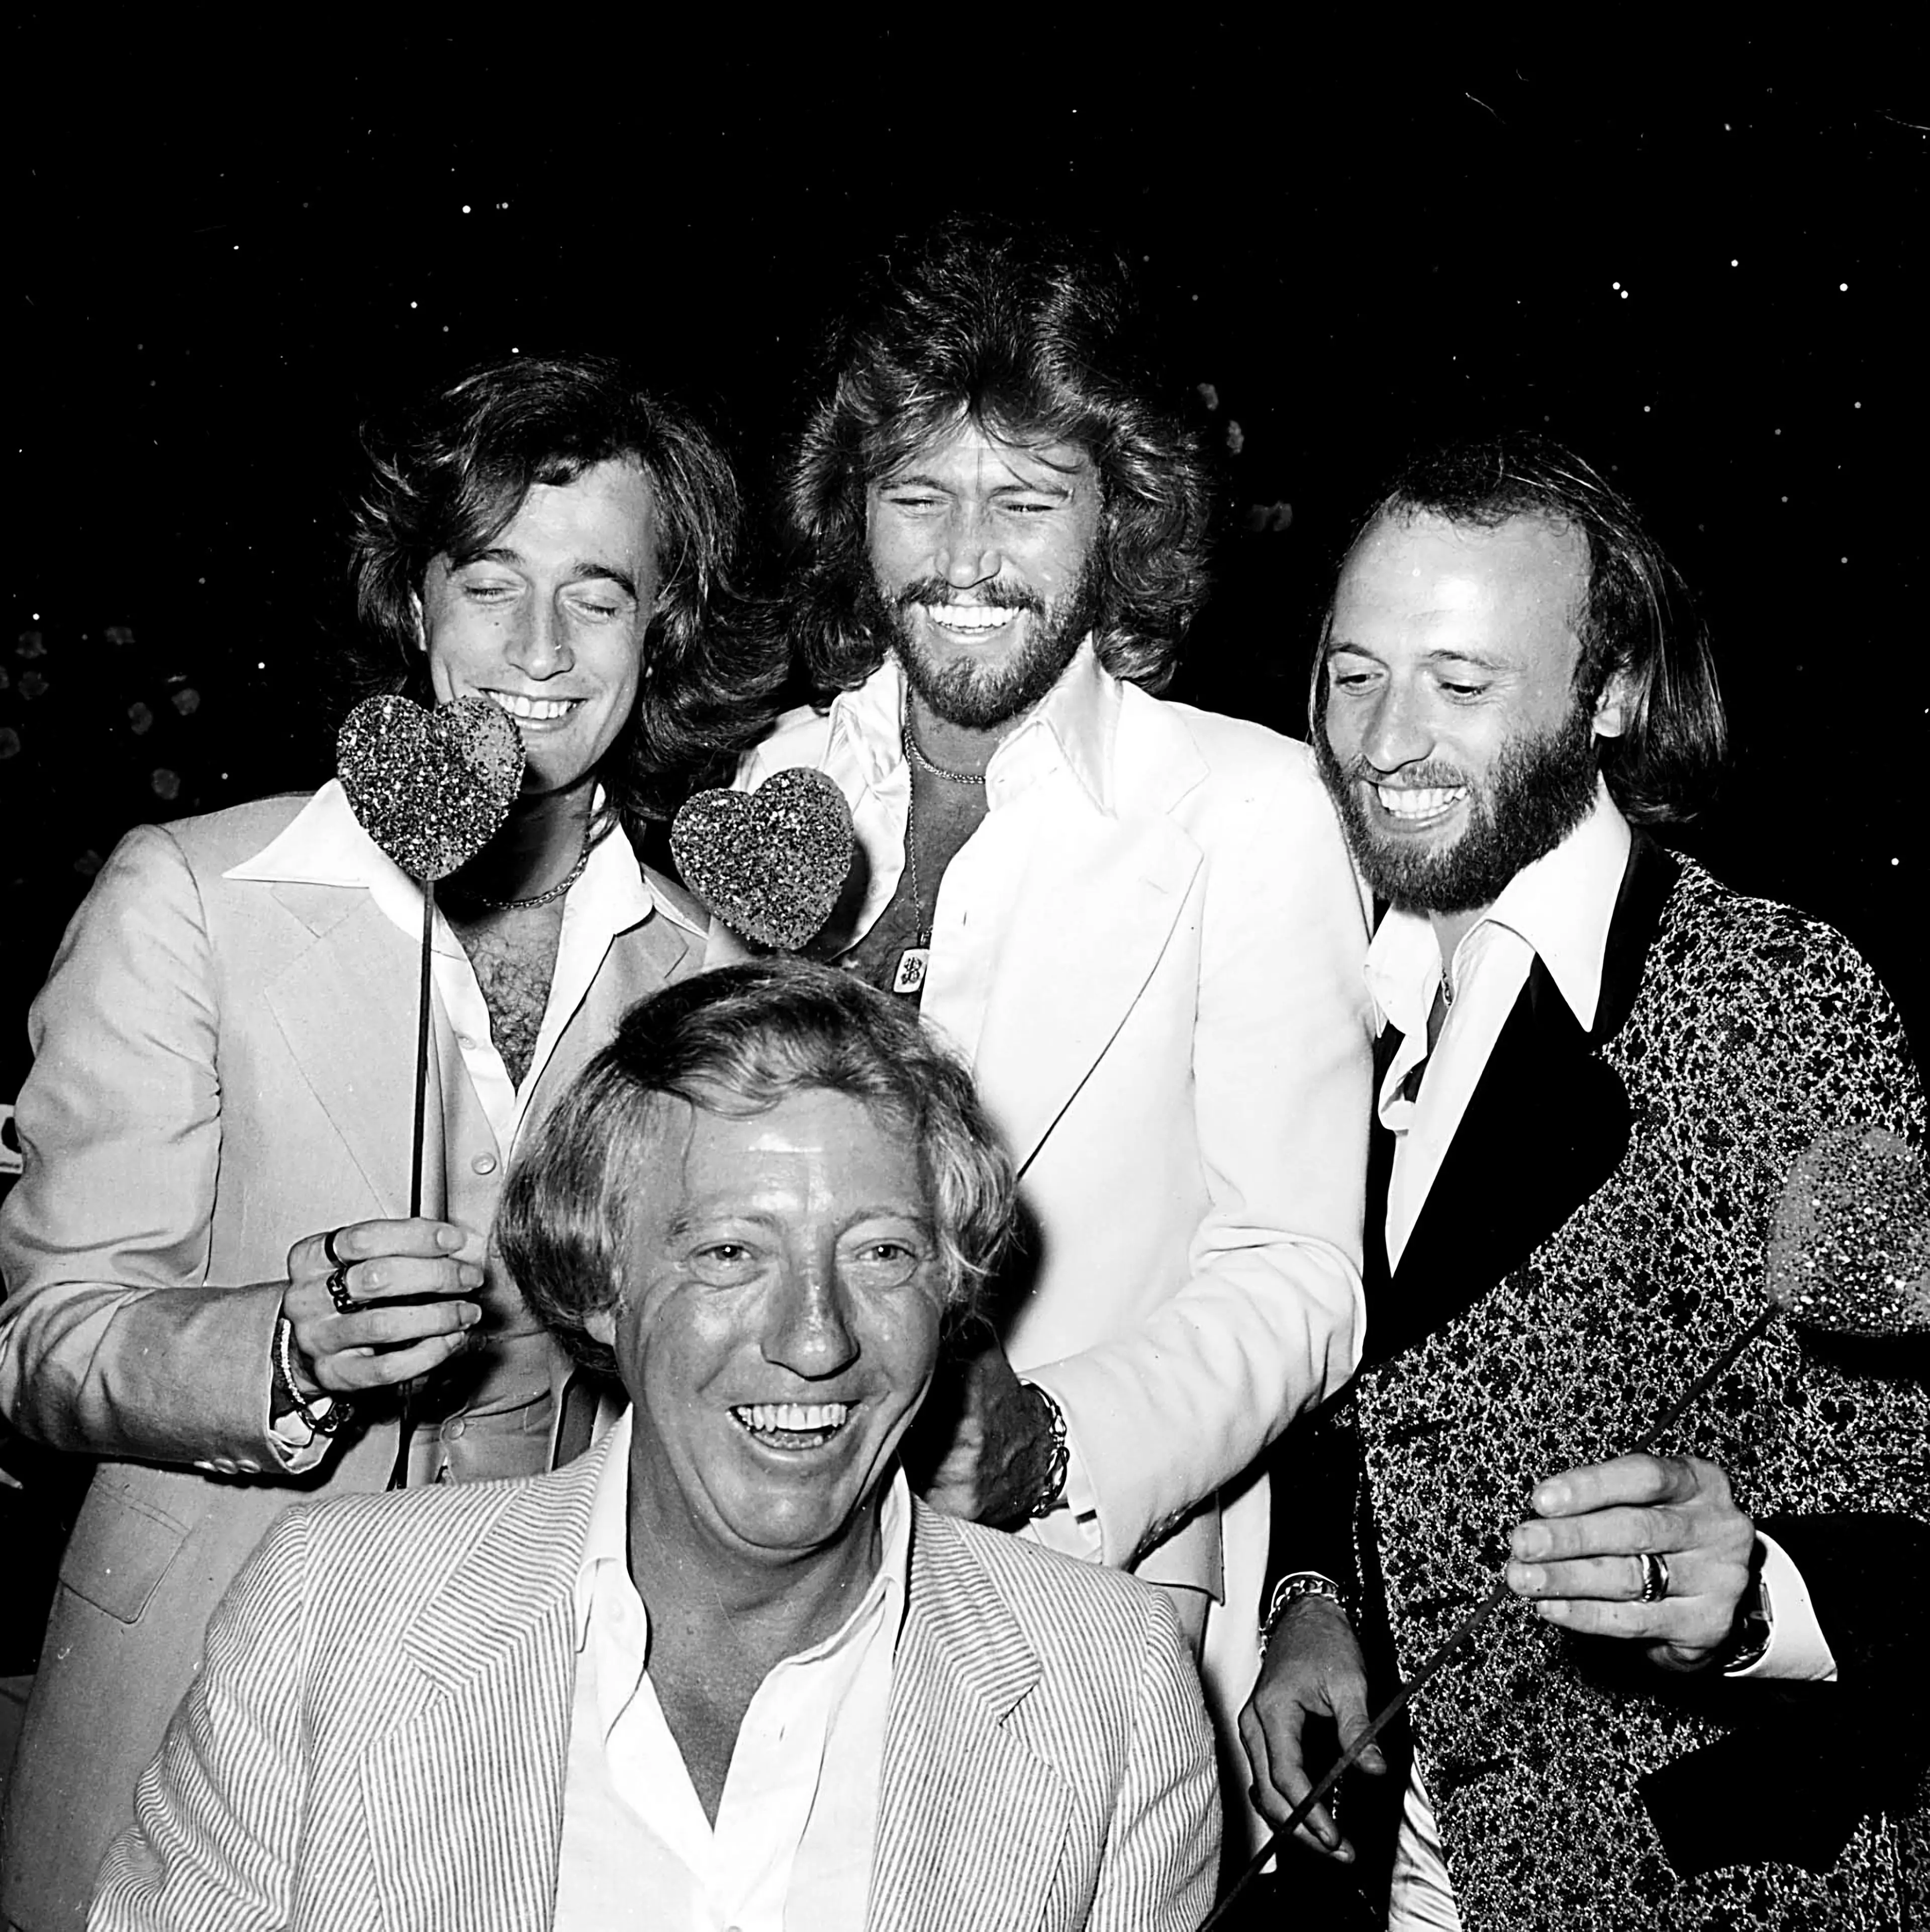 Mandatory Credit: Photo by Globe Photos/Mediapunch/Shutterstock (10192762a)The Bee Gees with Robert StigwoodThe Bee Gees with Robert Stigwood 1978